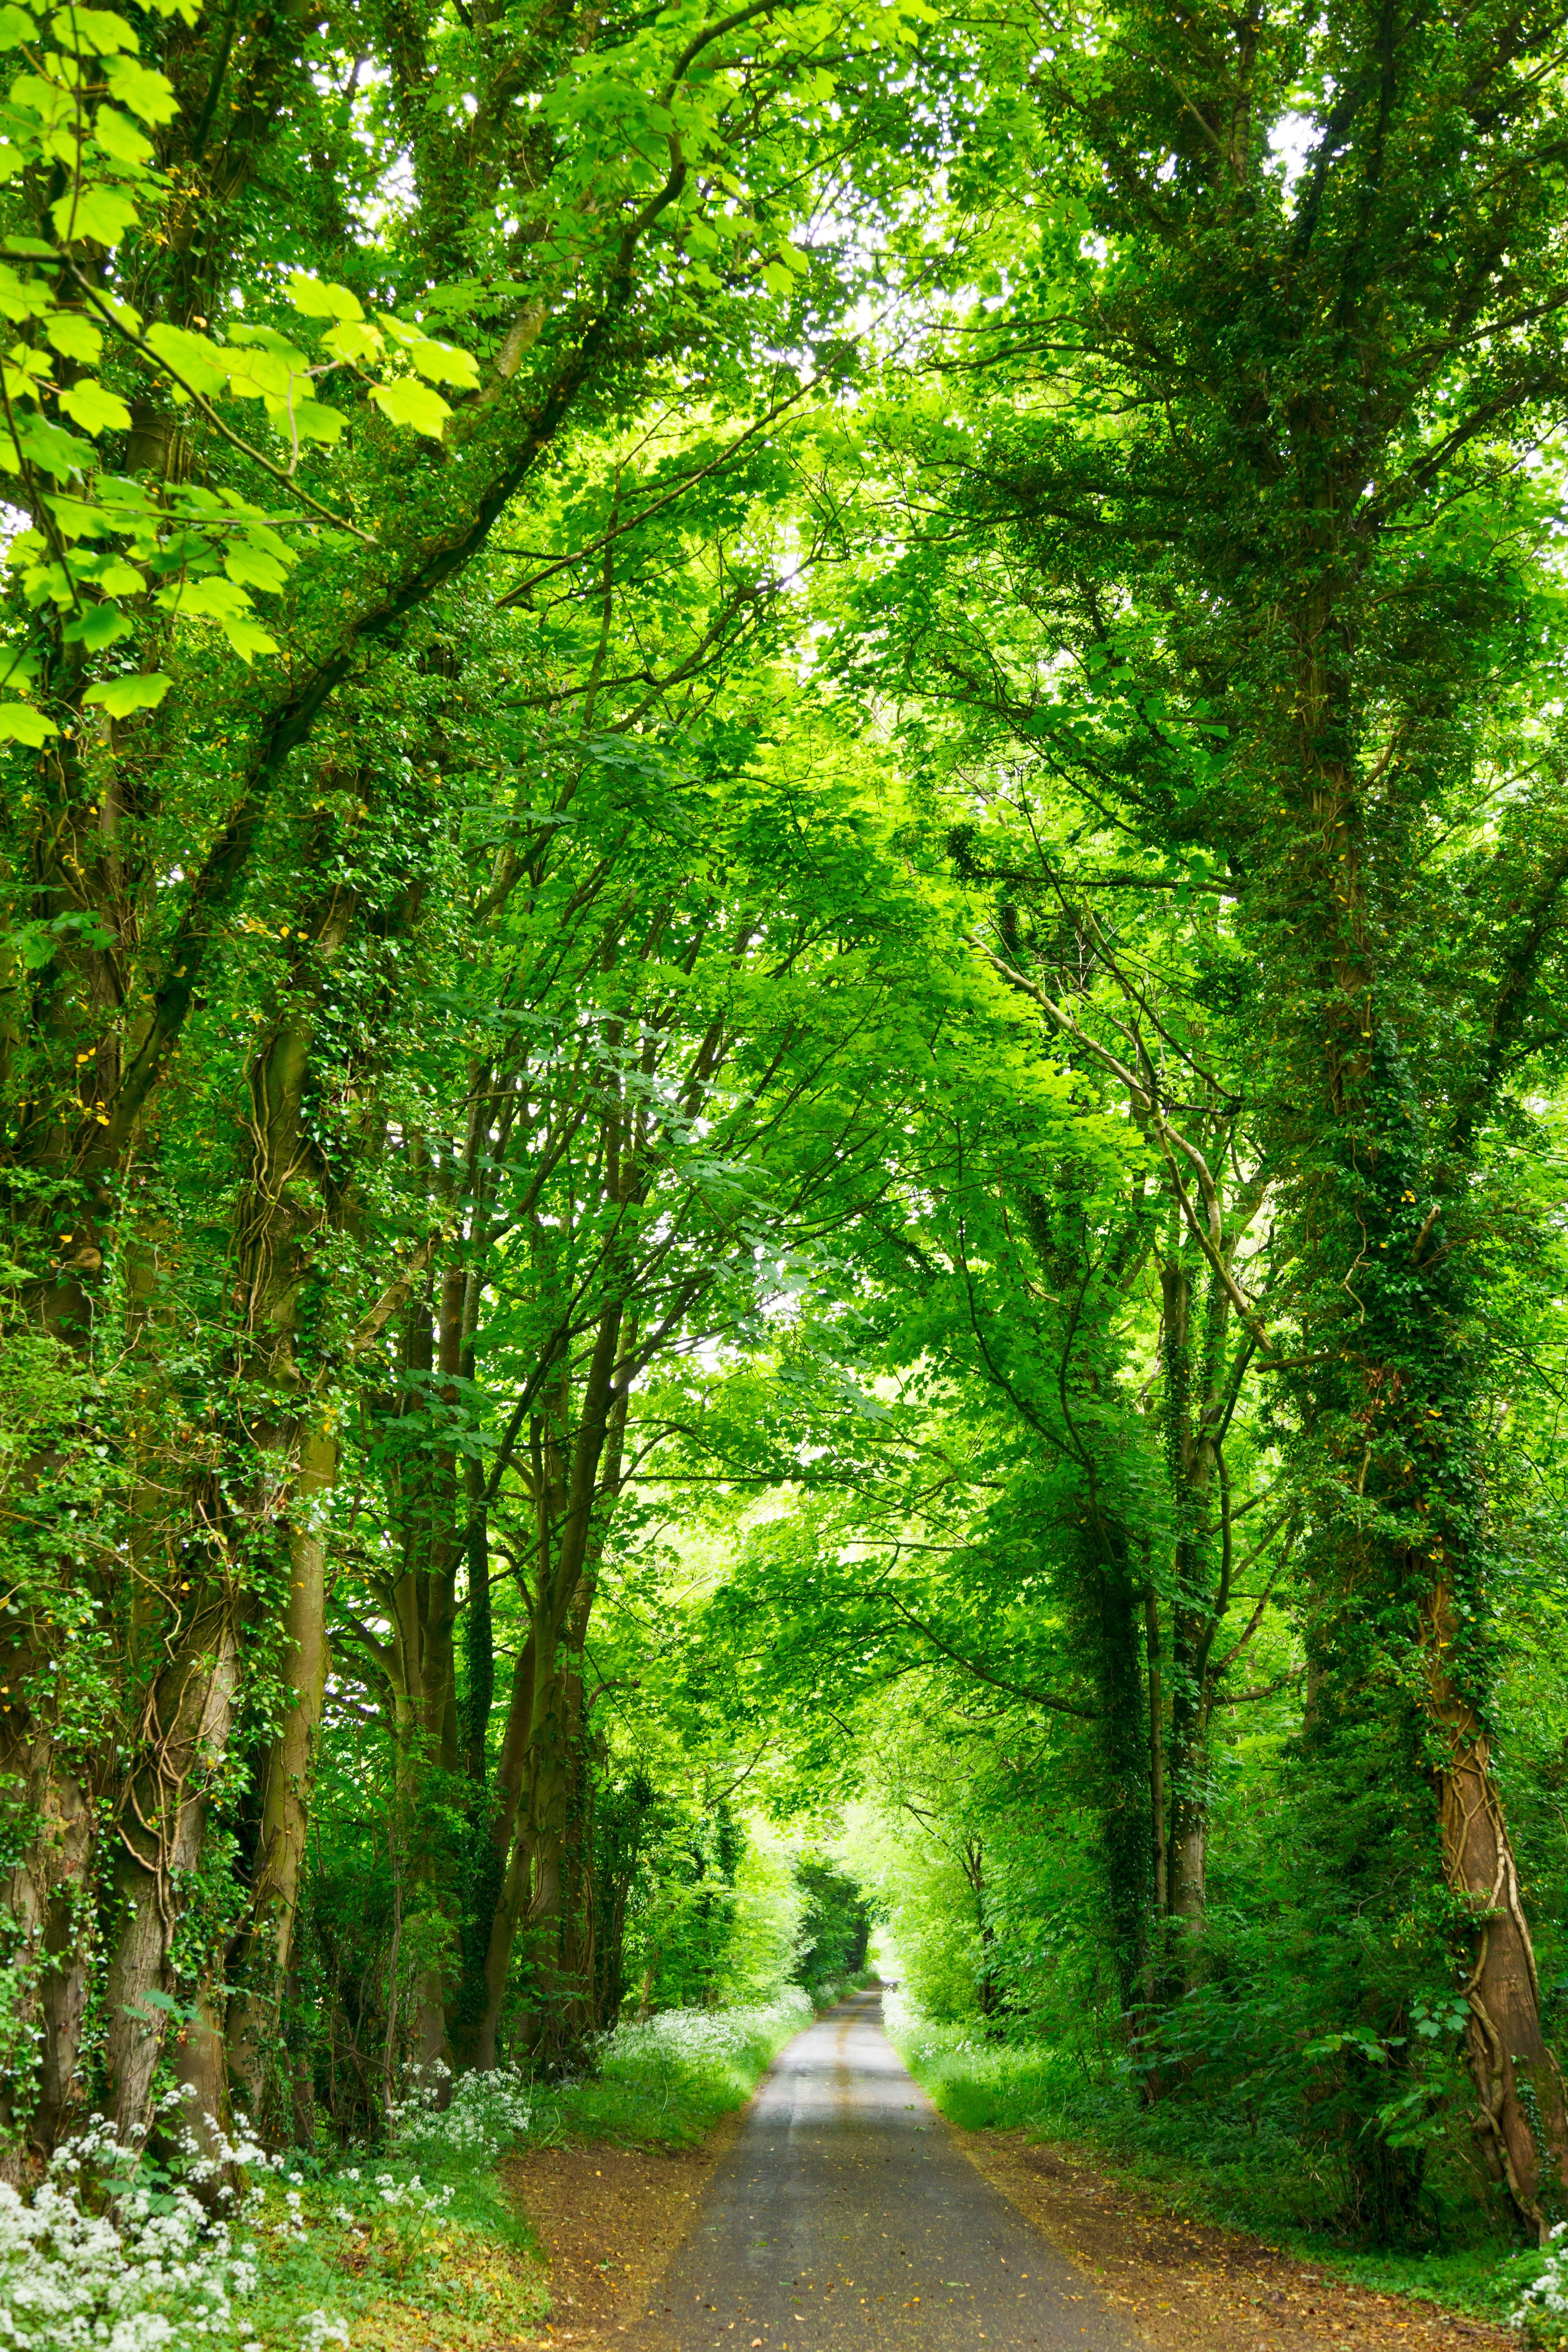 HD Wallpaper A narrow road lined with fresh green trees